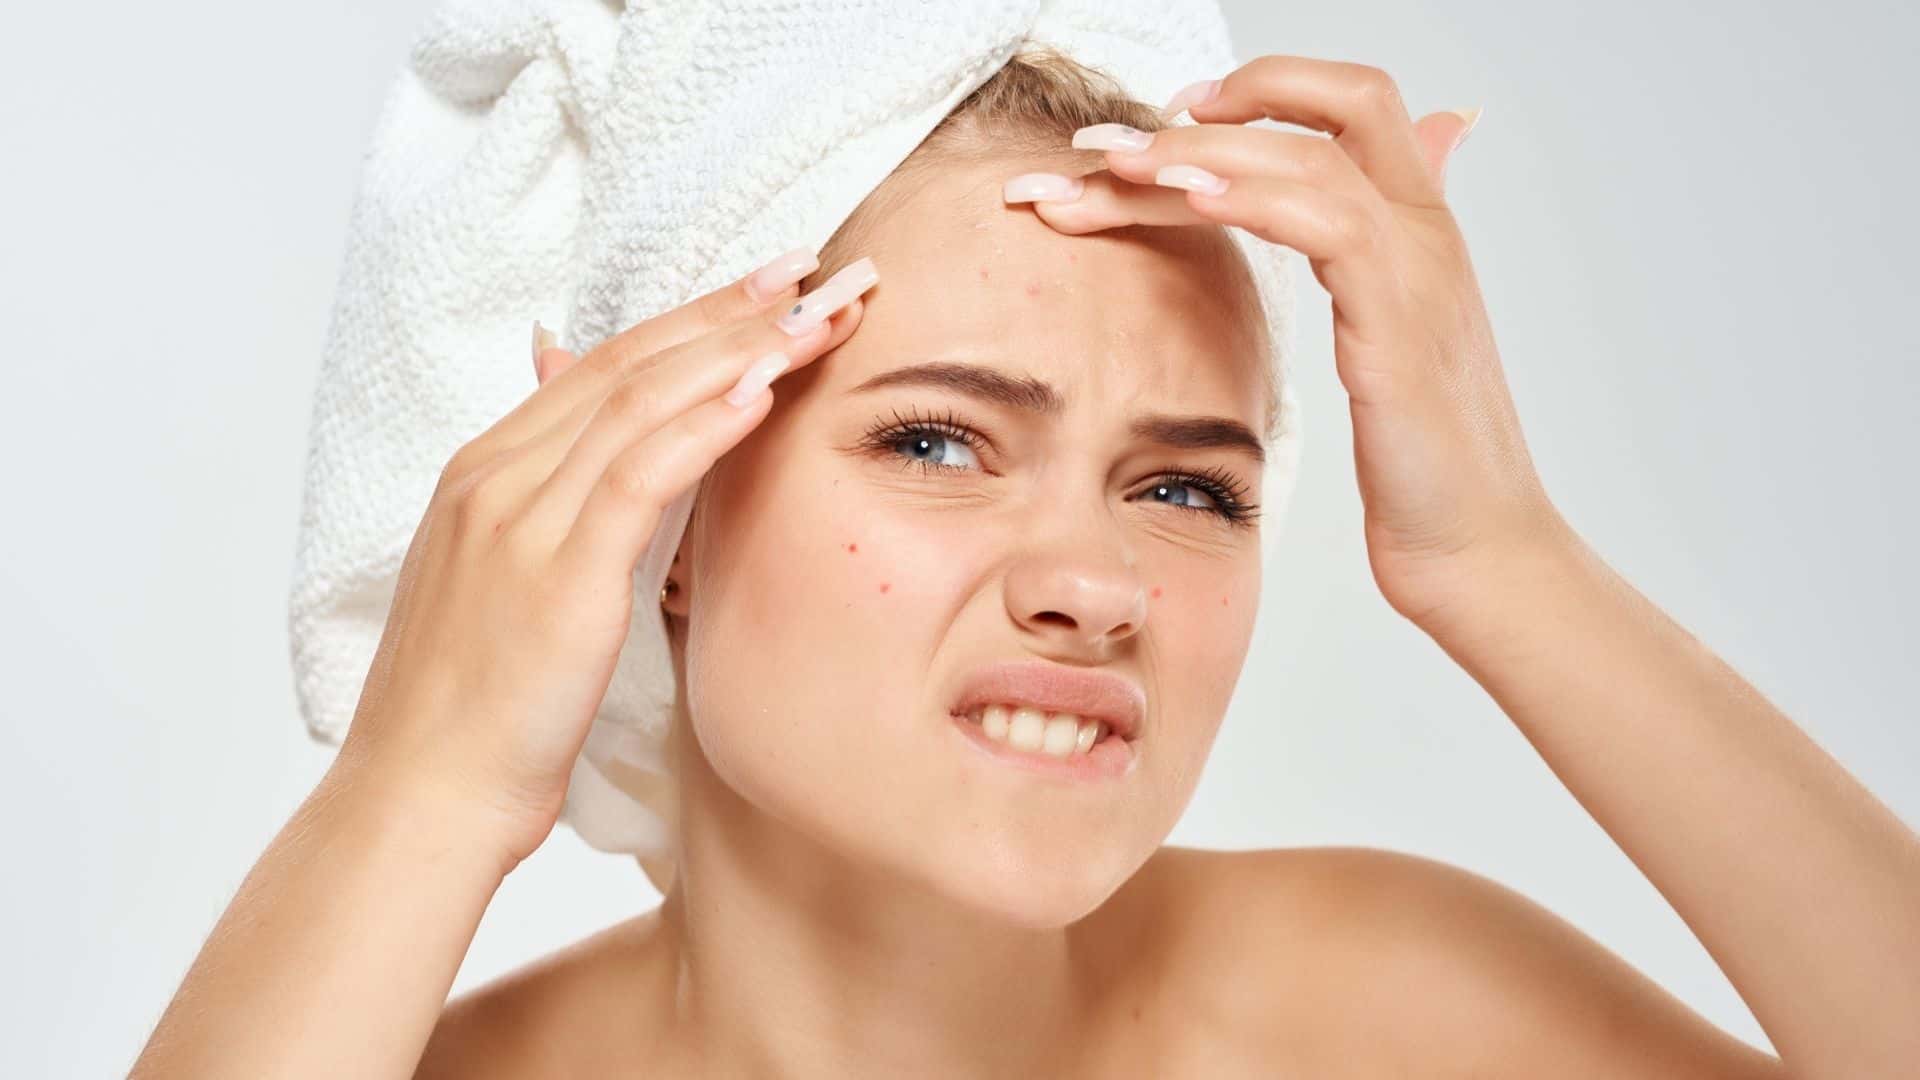 Does Dandruff cause acne?